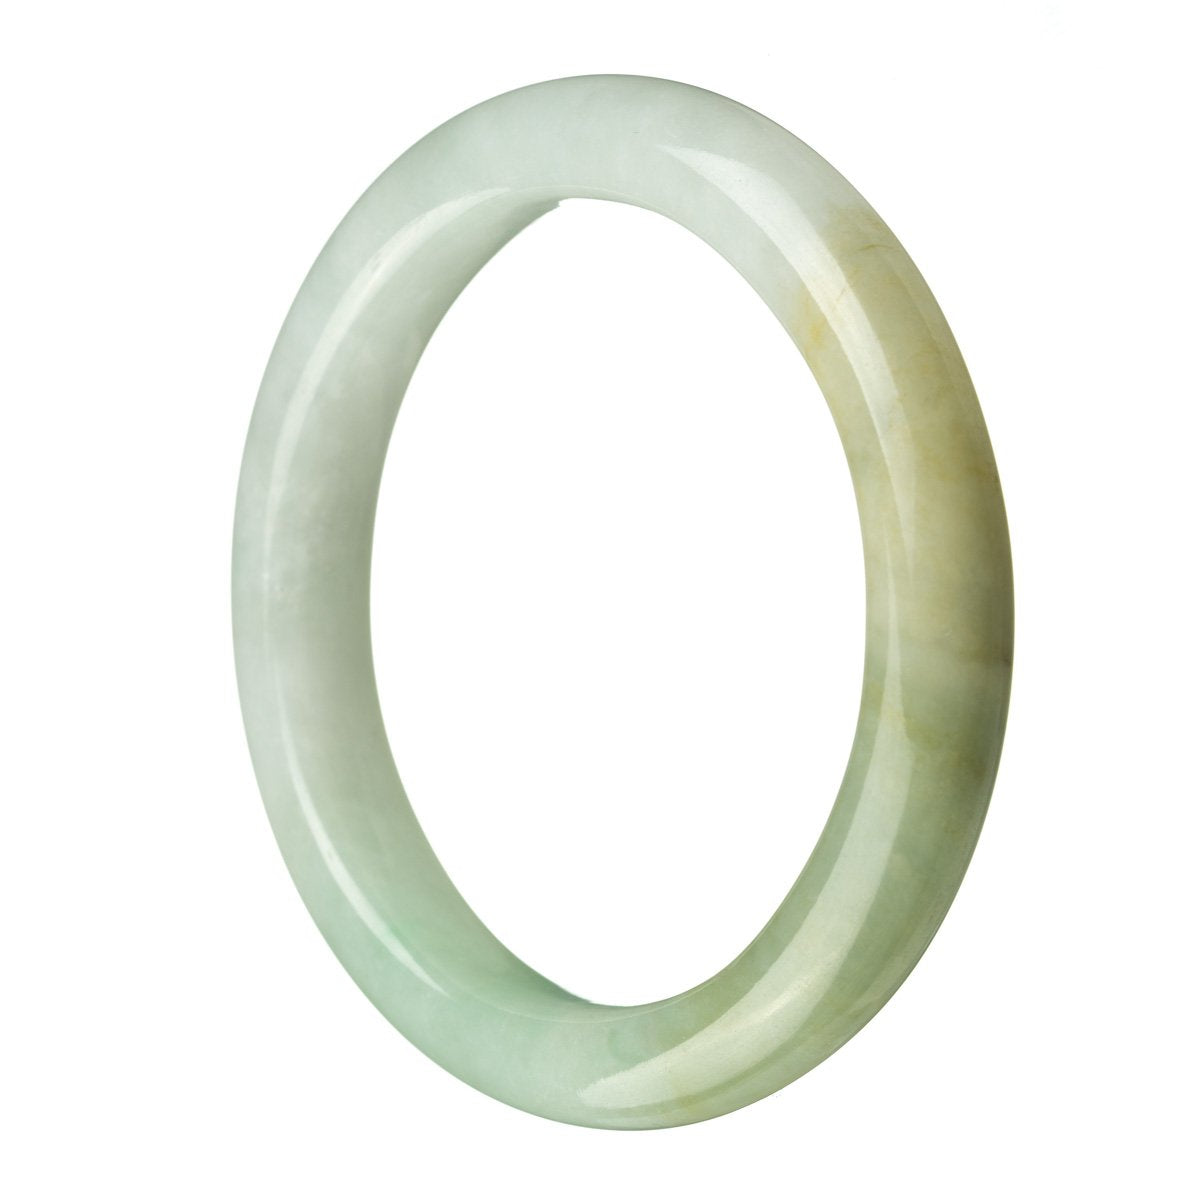 Close-up of a round green jade bracelet with a smooth surface and a shiny finish. The bracelet is made of genuine grade A green jade, known for its vibrant color and natural beauty. It measures 63mm in diameter, making it a perfect fit for any wrist size. The MAYS™ logo is engraved discreetly on the inner side of the bracelet.